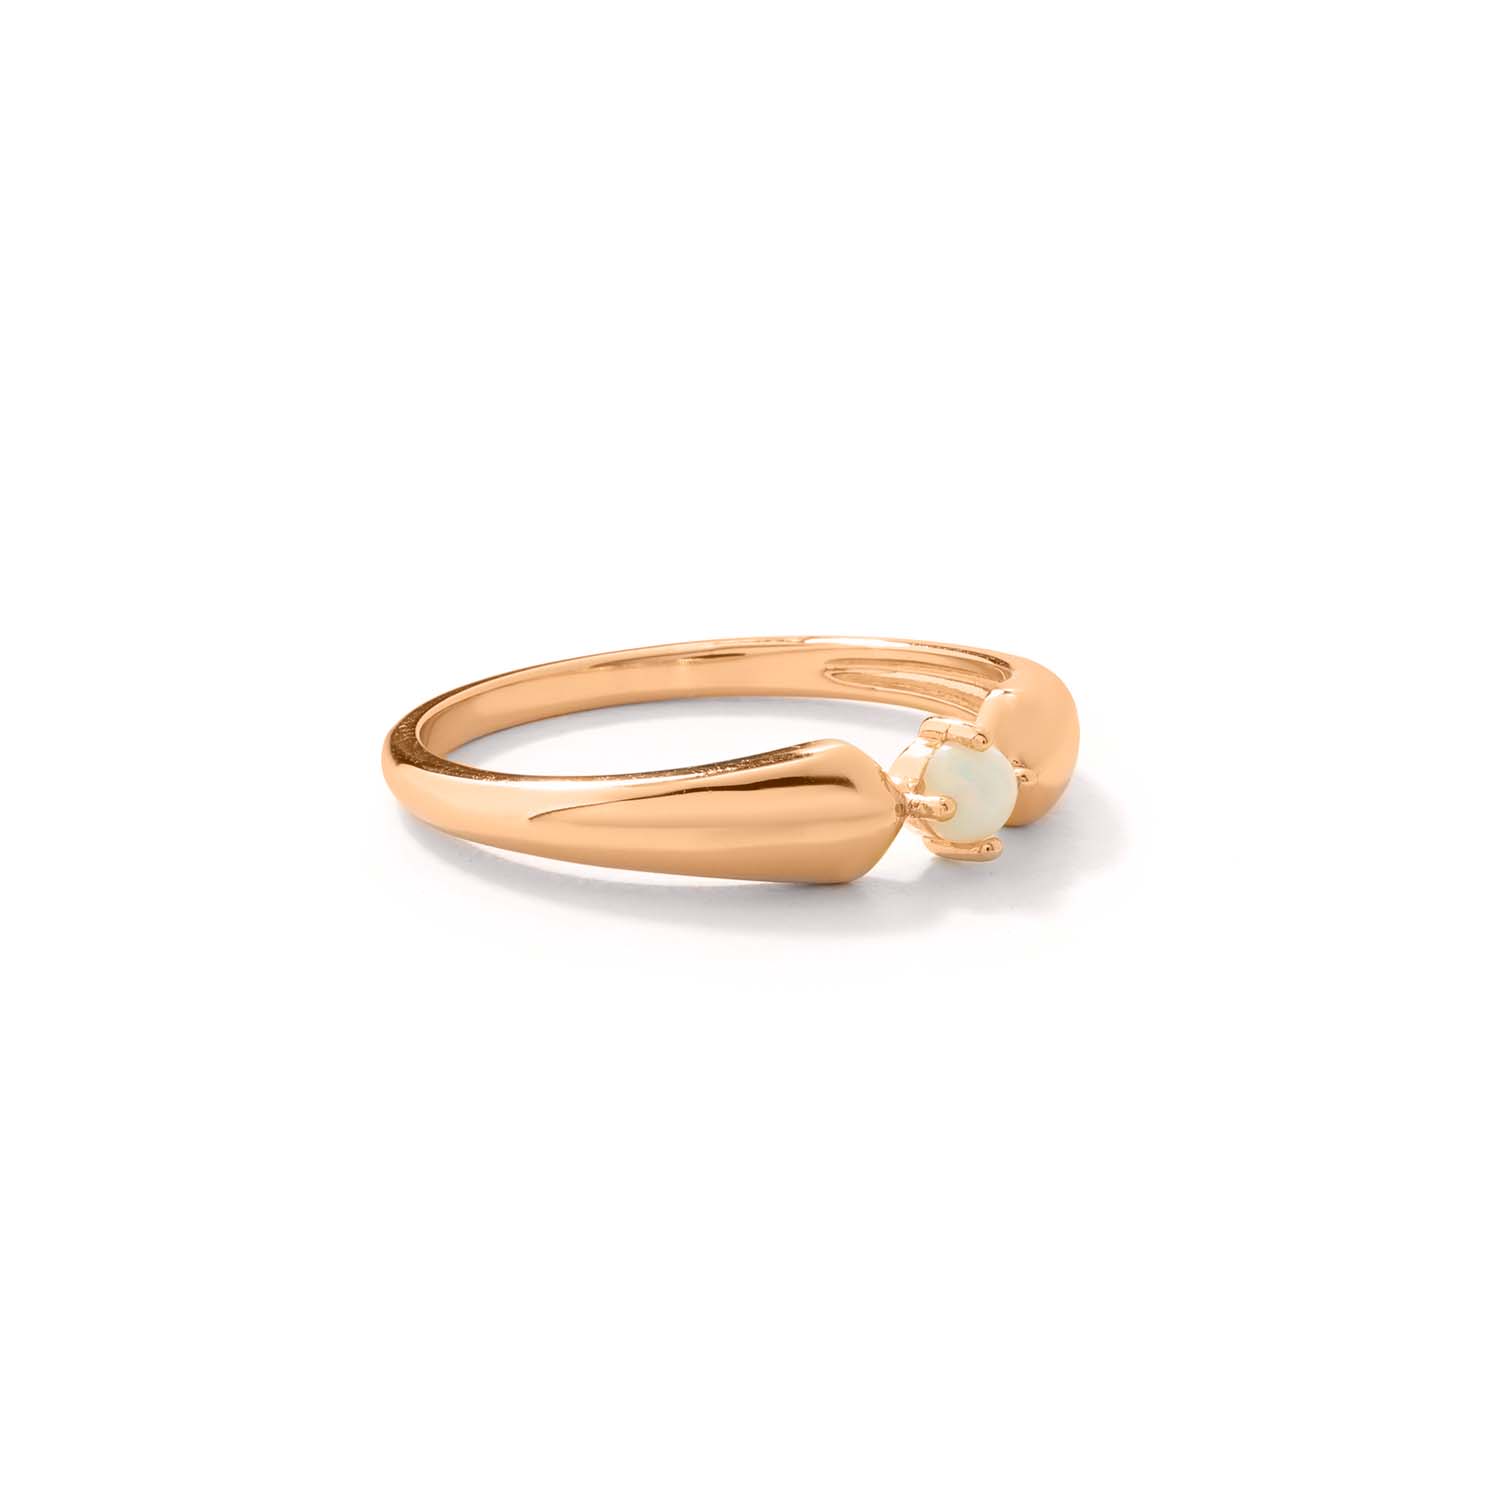 Elegant and minimalist rose gold ring set with opals.